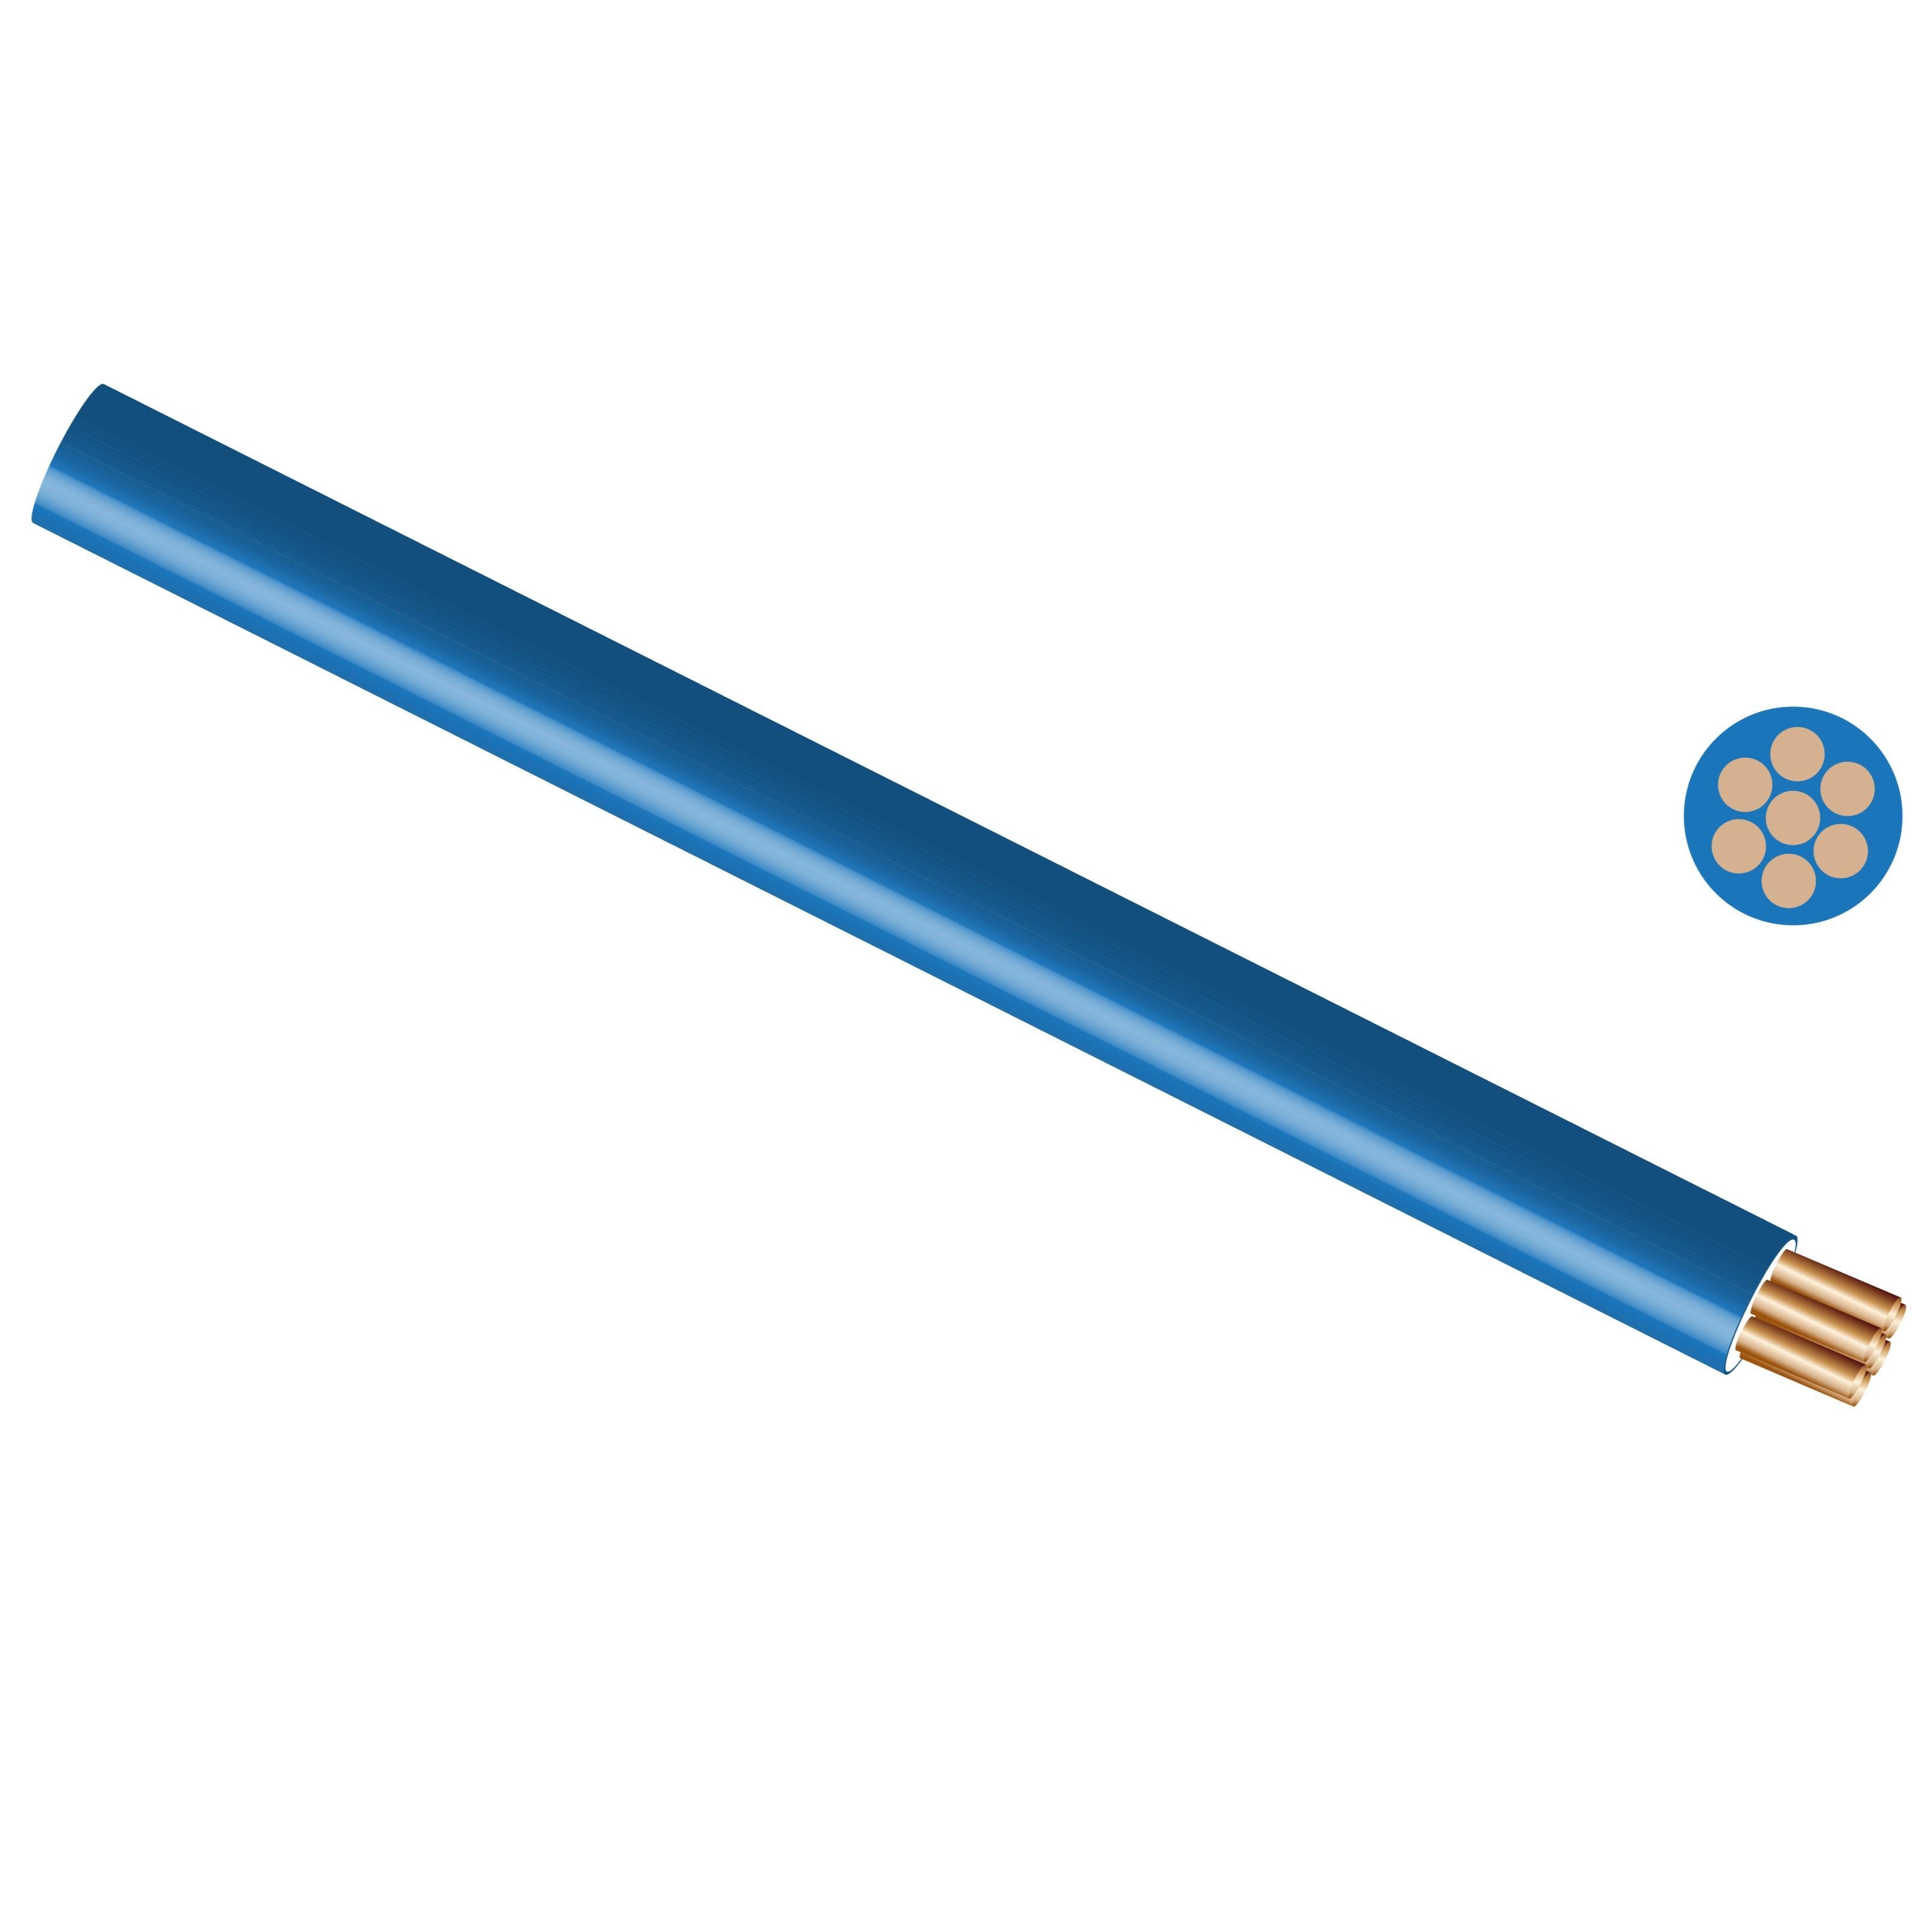 Cable GP House Wire 𝑝/𝑚eter »-Electrical-Private Label Electrical-1.5𝑚𝑚²-Blue-diyshop.co.za